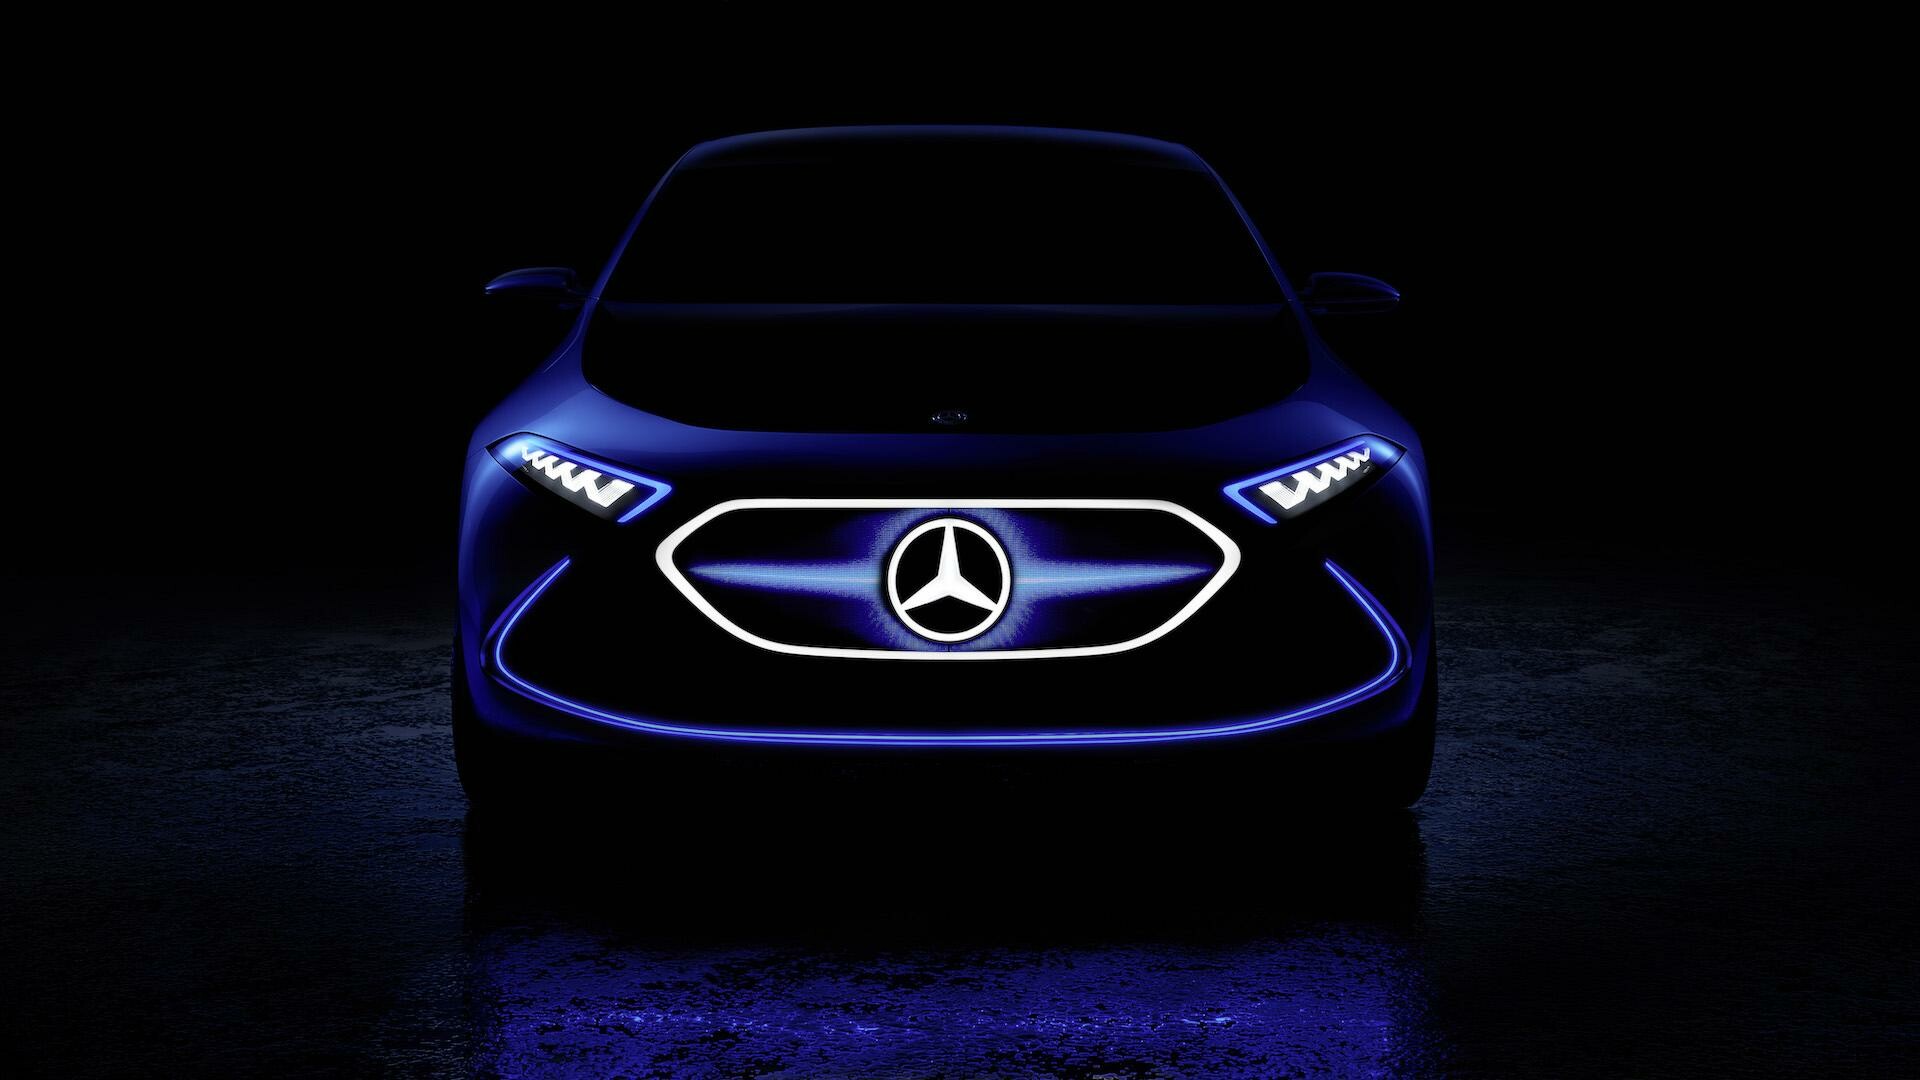 Mercedes-Benz: Electric EQA Concept, A battery electric subcompact luxury crossover SUV. 1920x1080 Full HD Wallpaper.